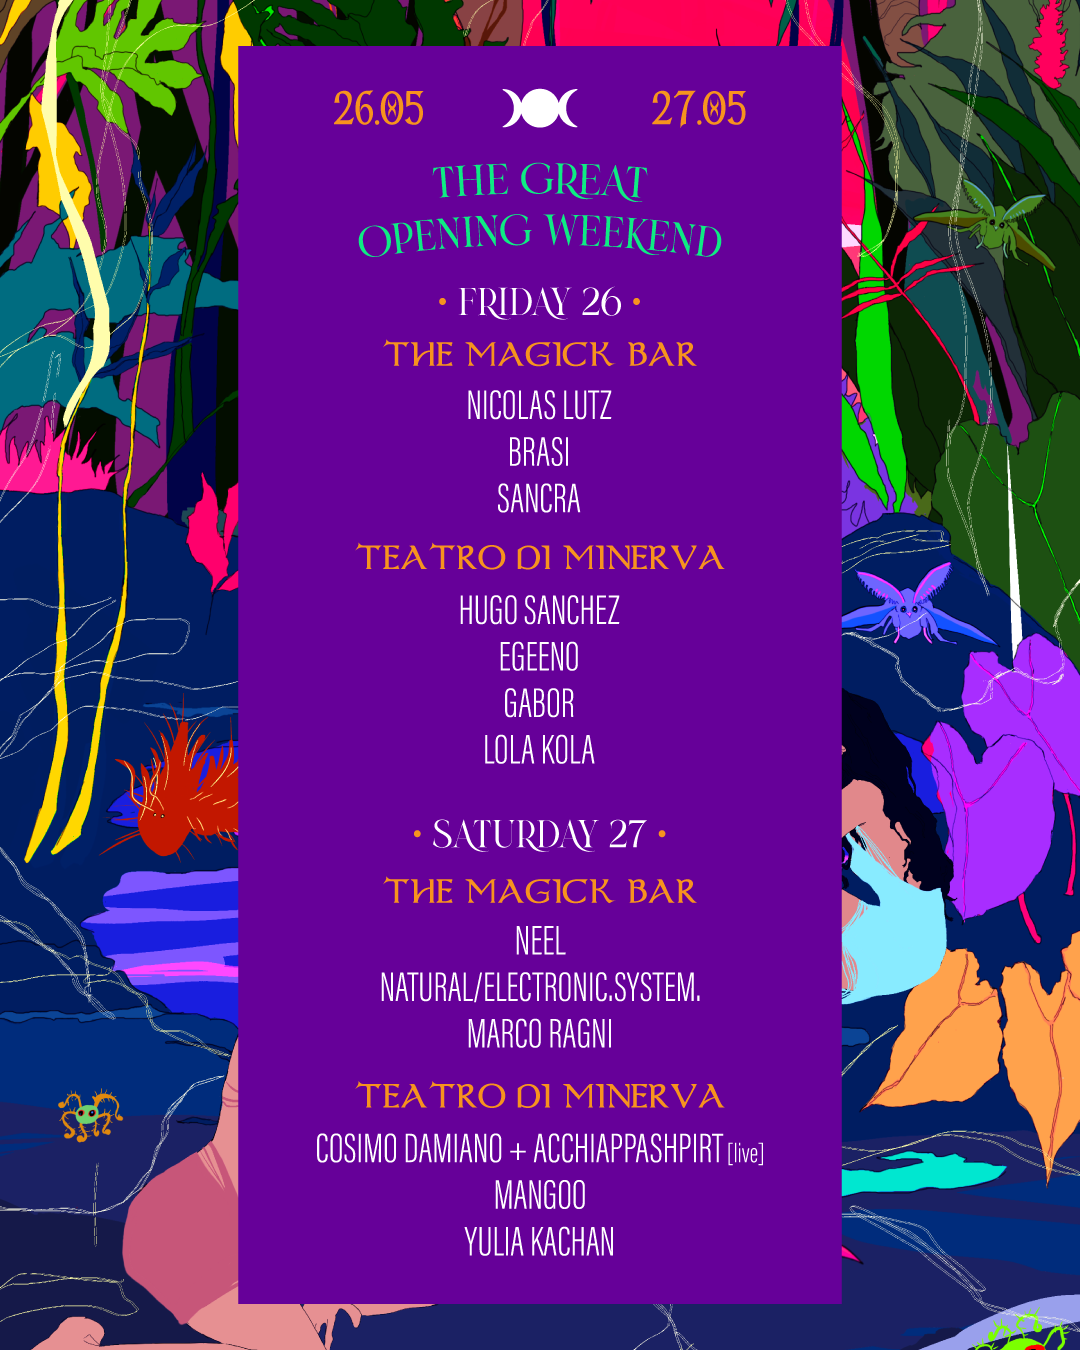 THE MAGICK BAR - The Great Opening Weekend - Página frontal